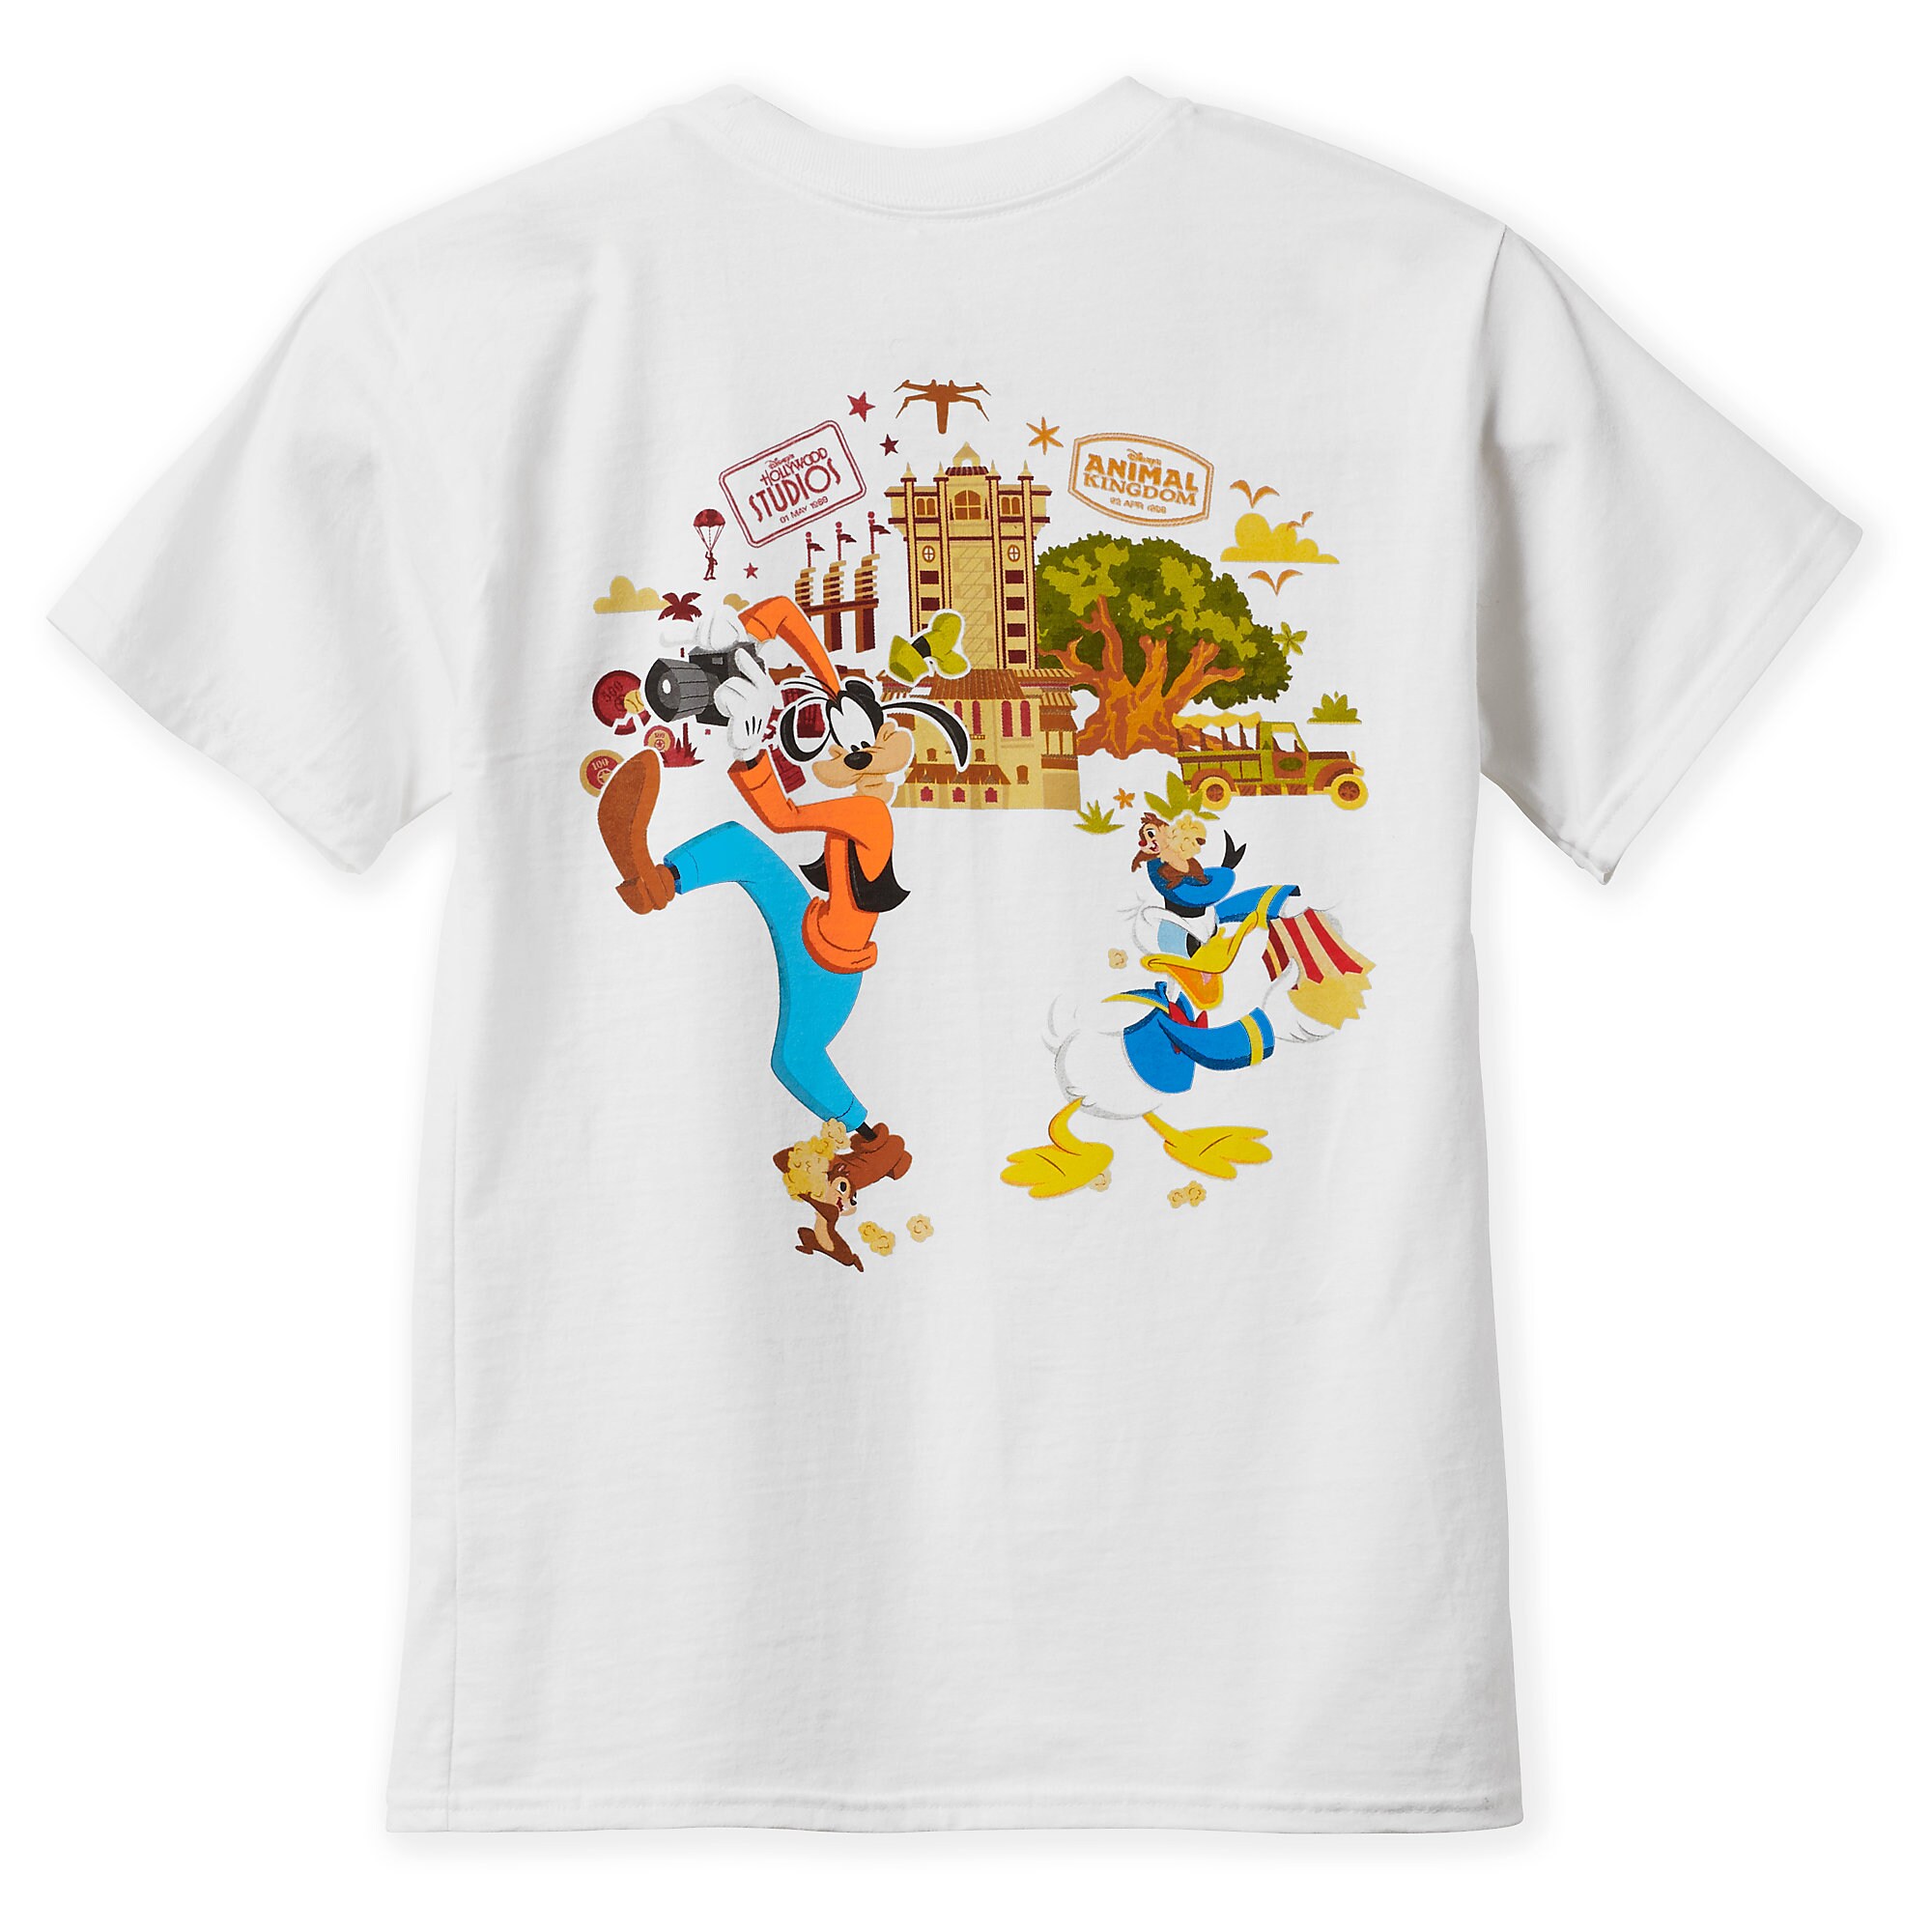 Mickey Mouse and Friends T-Shirt for Kids - Walt Disney World 2019